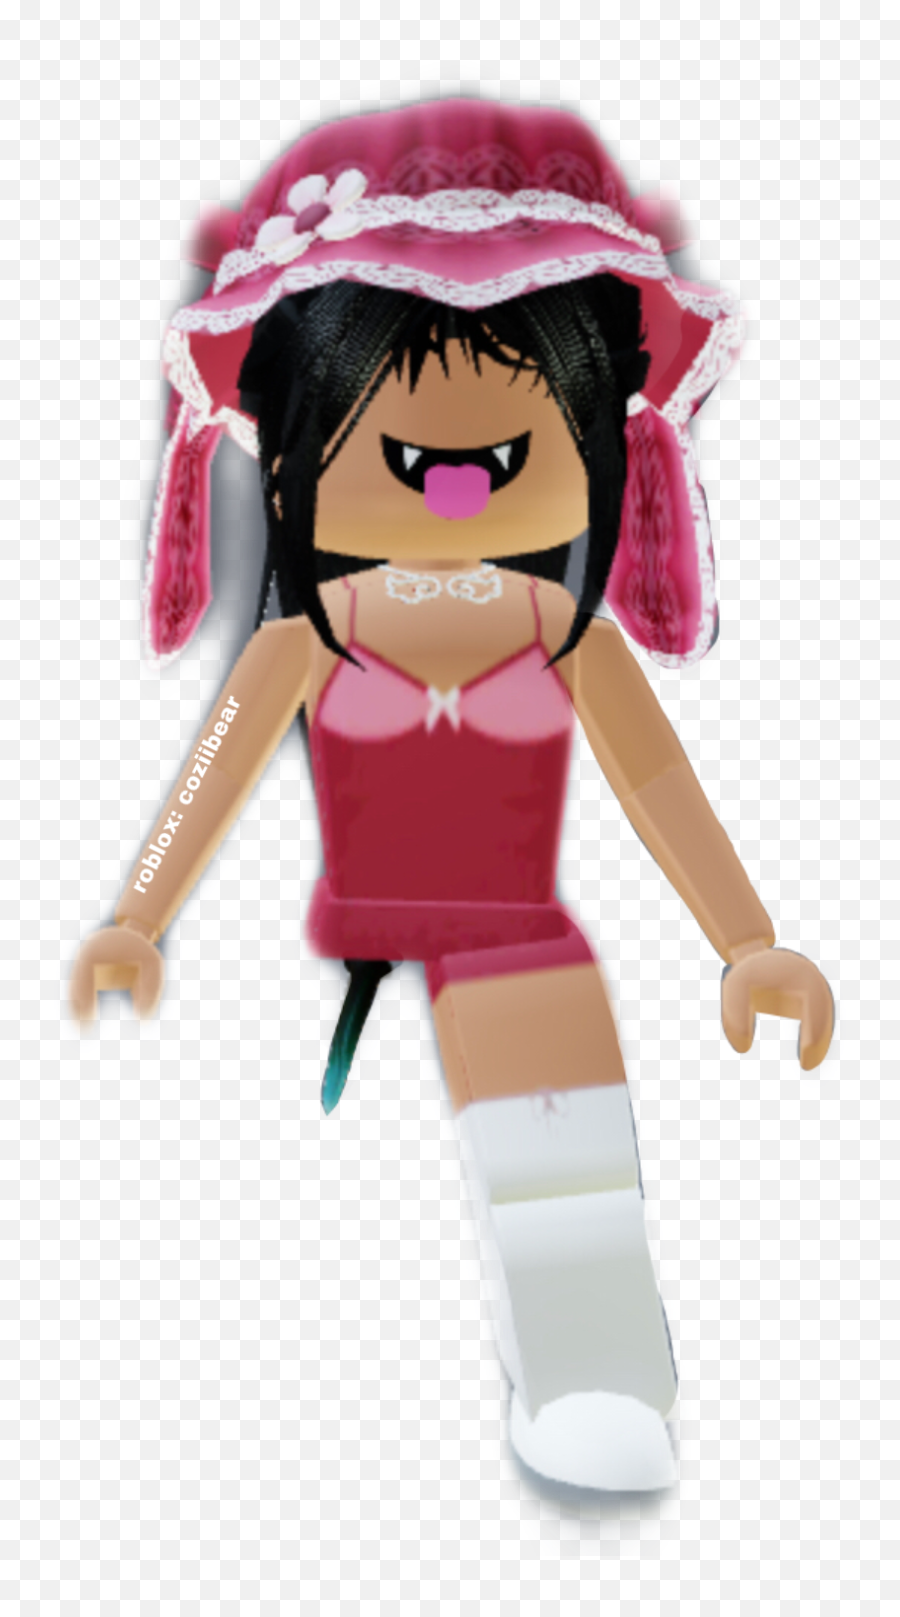 The Most Edited Copy Picsart Emoji,Emojis To Copy And Paste For Roblox